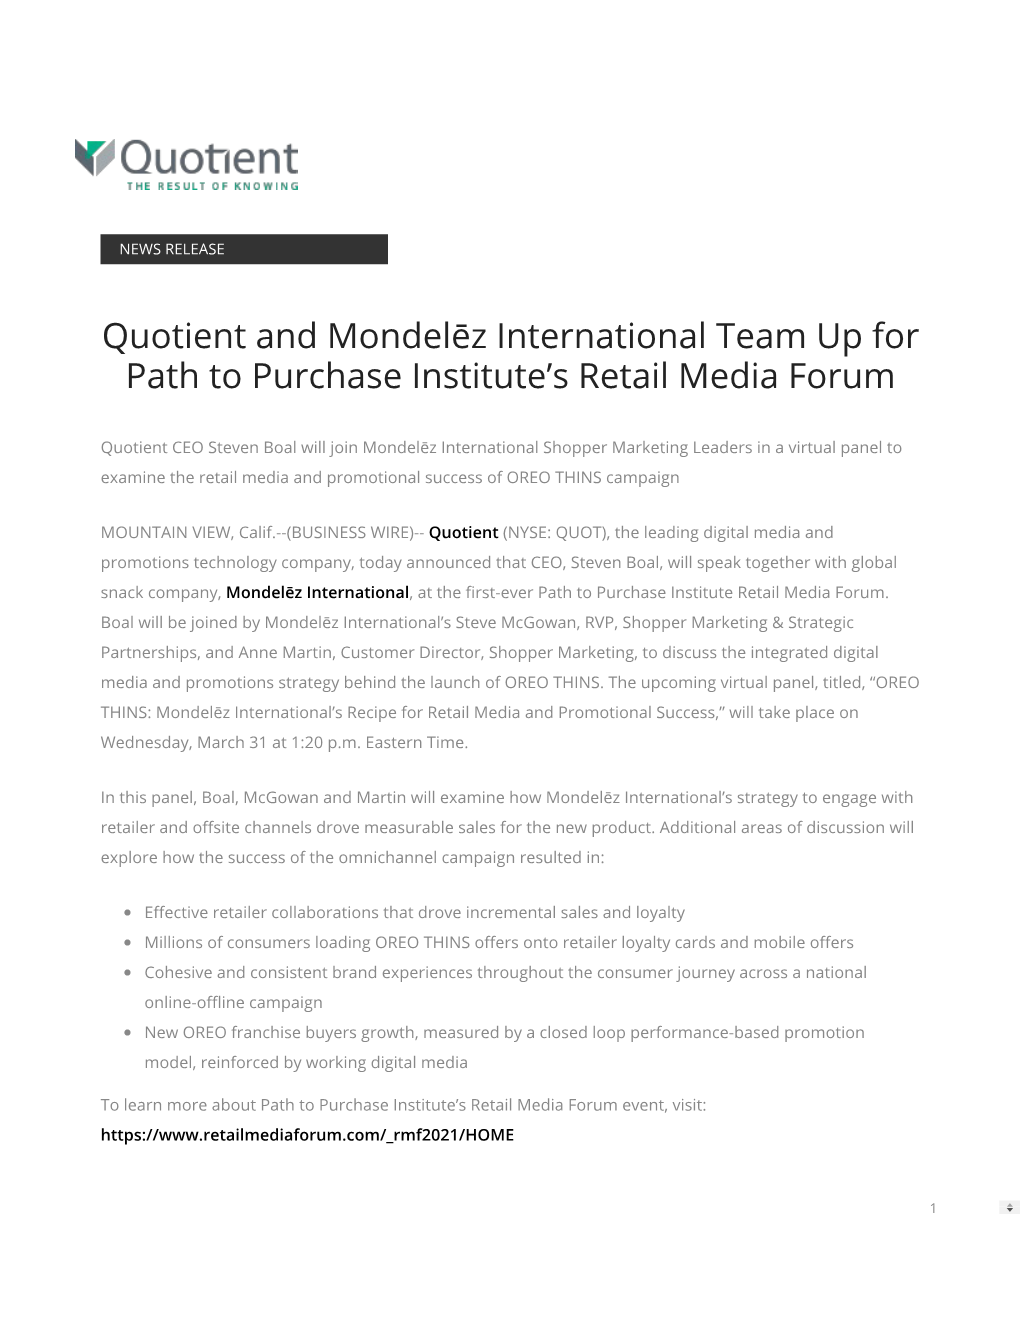 Quotient and Mondelēz International Team up for Path to Purchase Institute’S Retail Media Forum